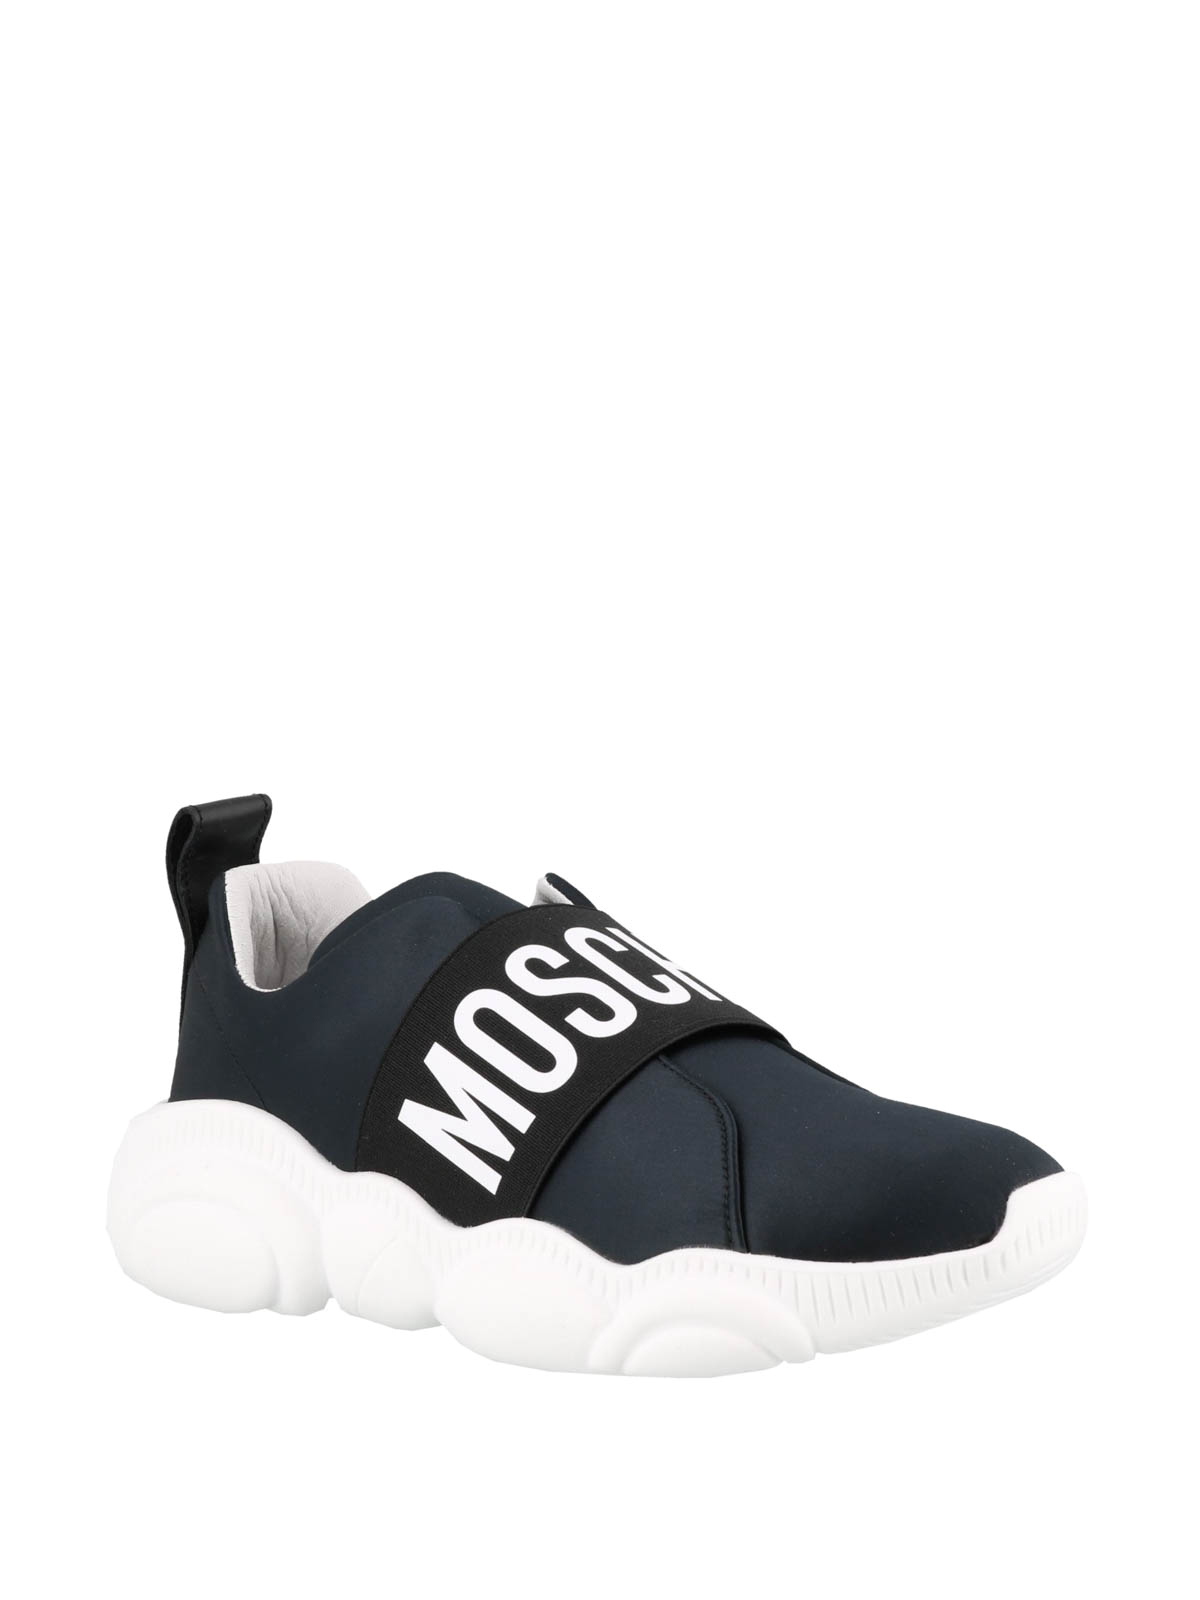 moschino sneakers